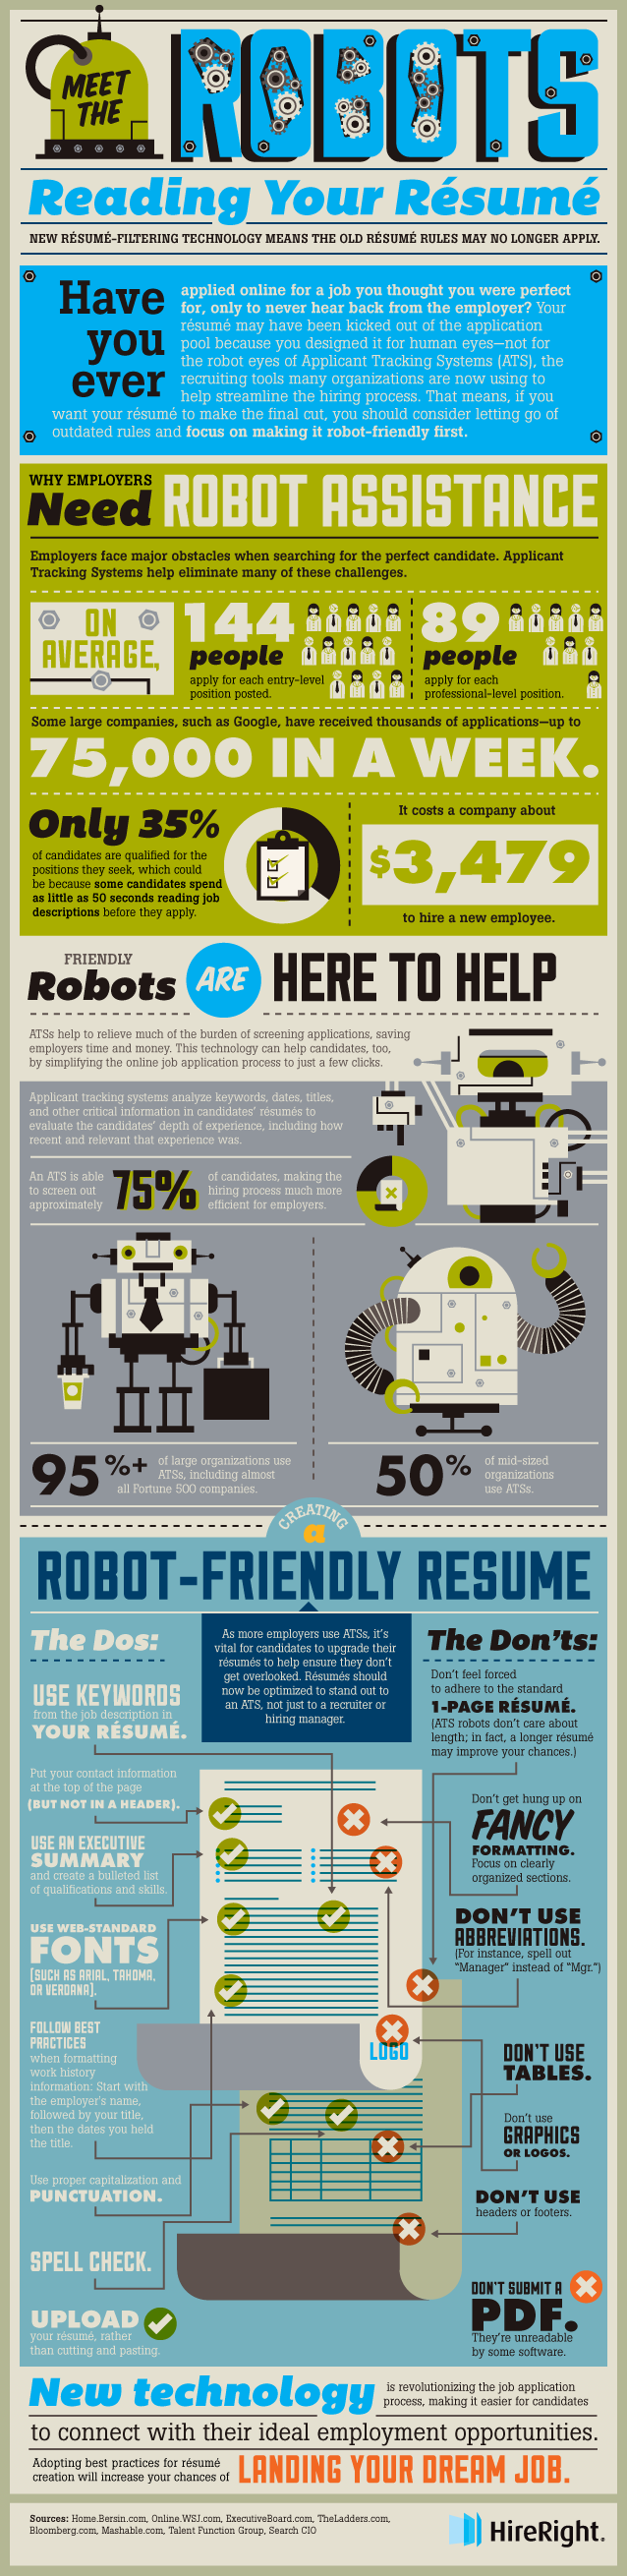 Meet the Robots Reading Your Resume - An infographic by HireRight